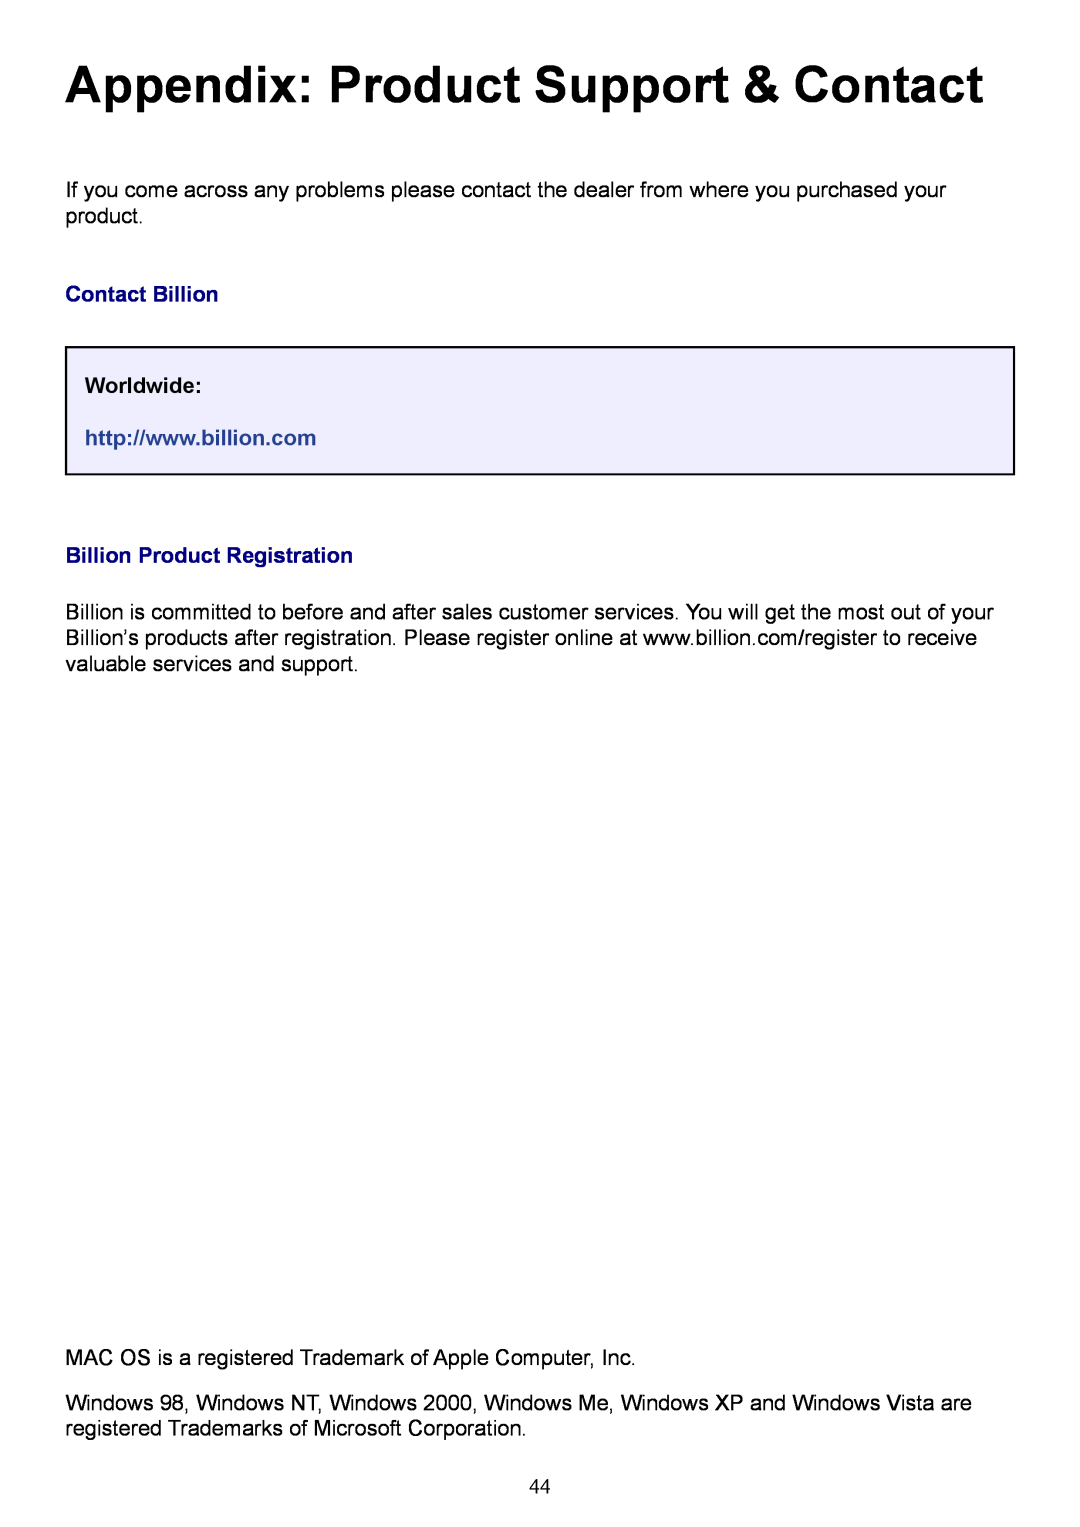 Billion Electric Company 2073 user manual Appendix Product Support & Contact, Worldwide 